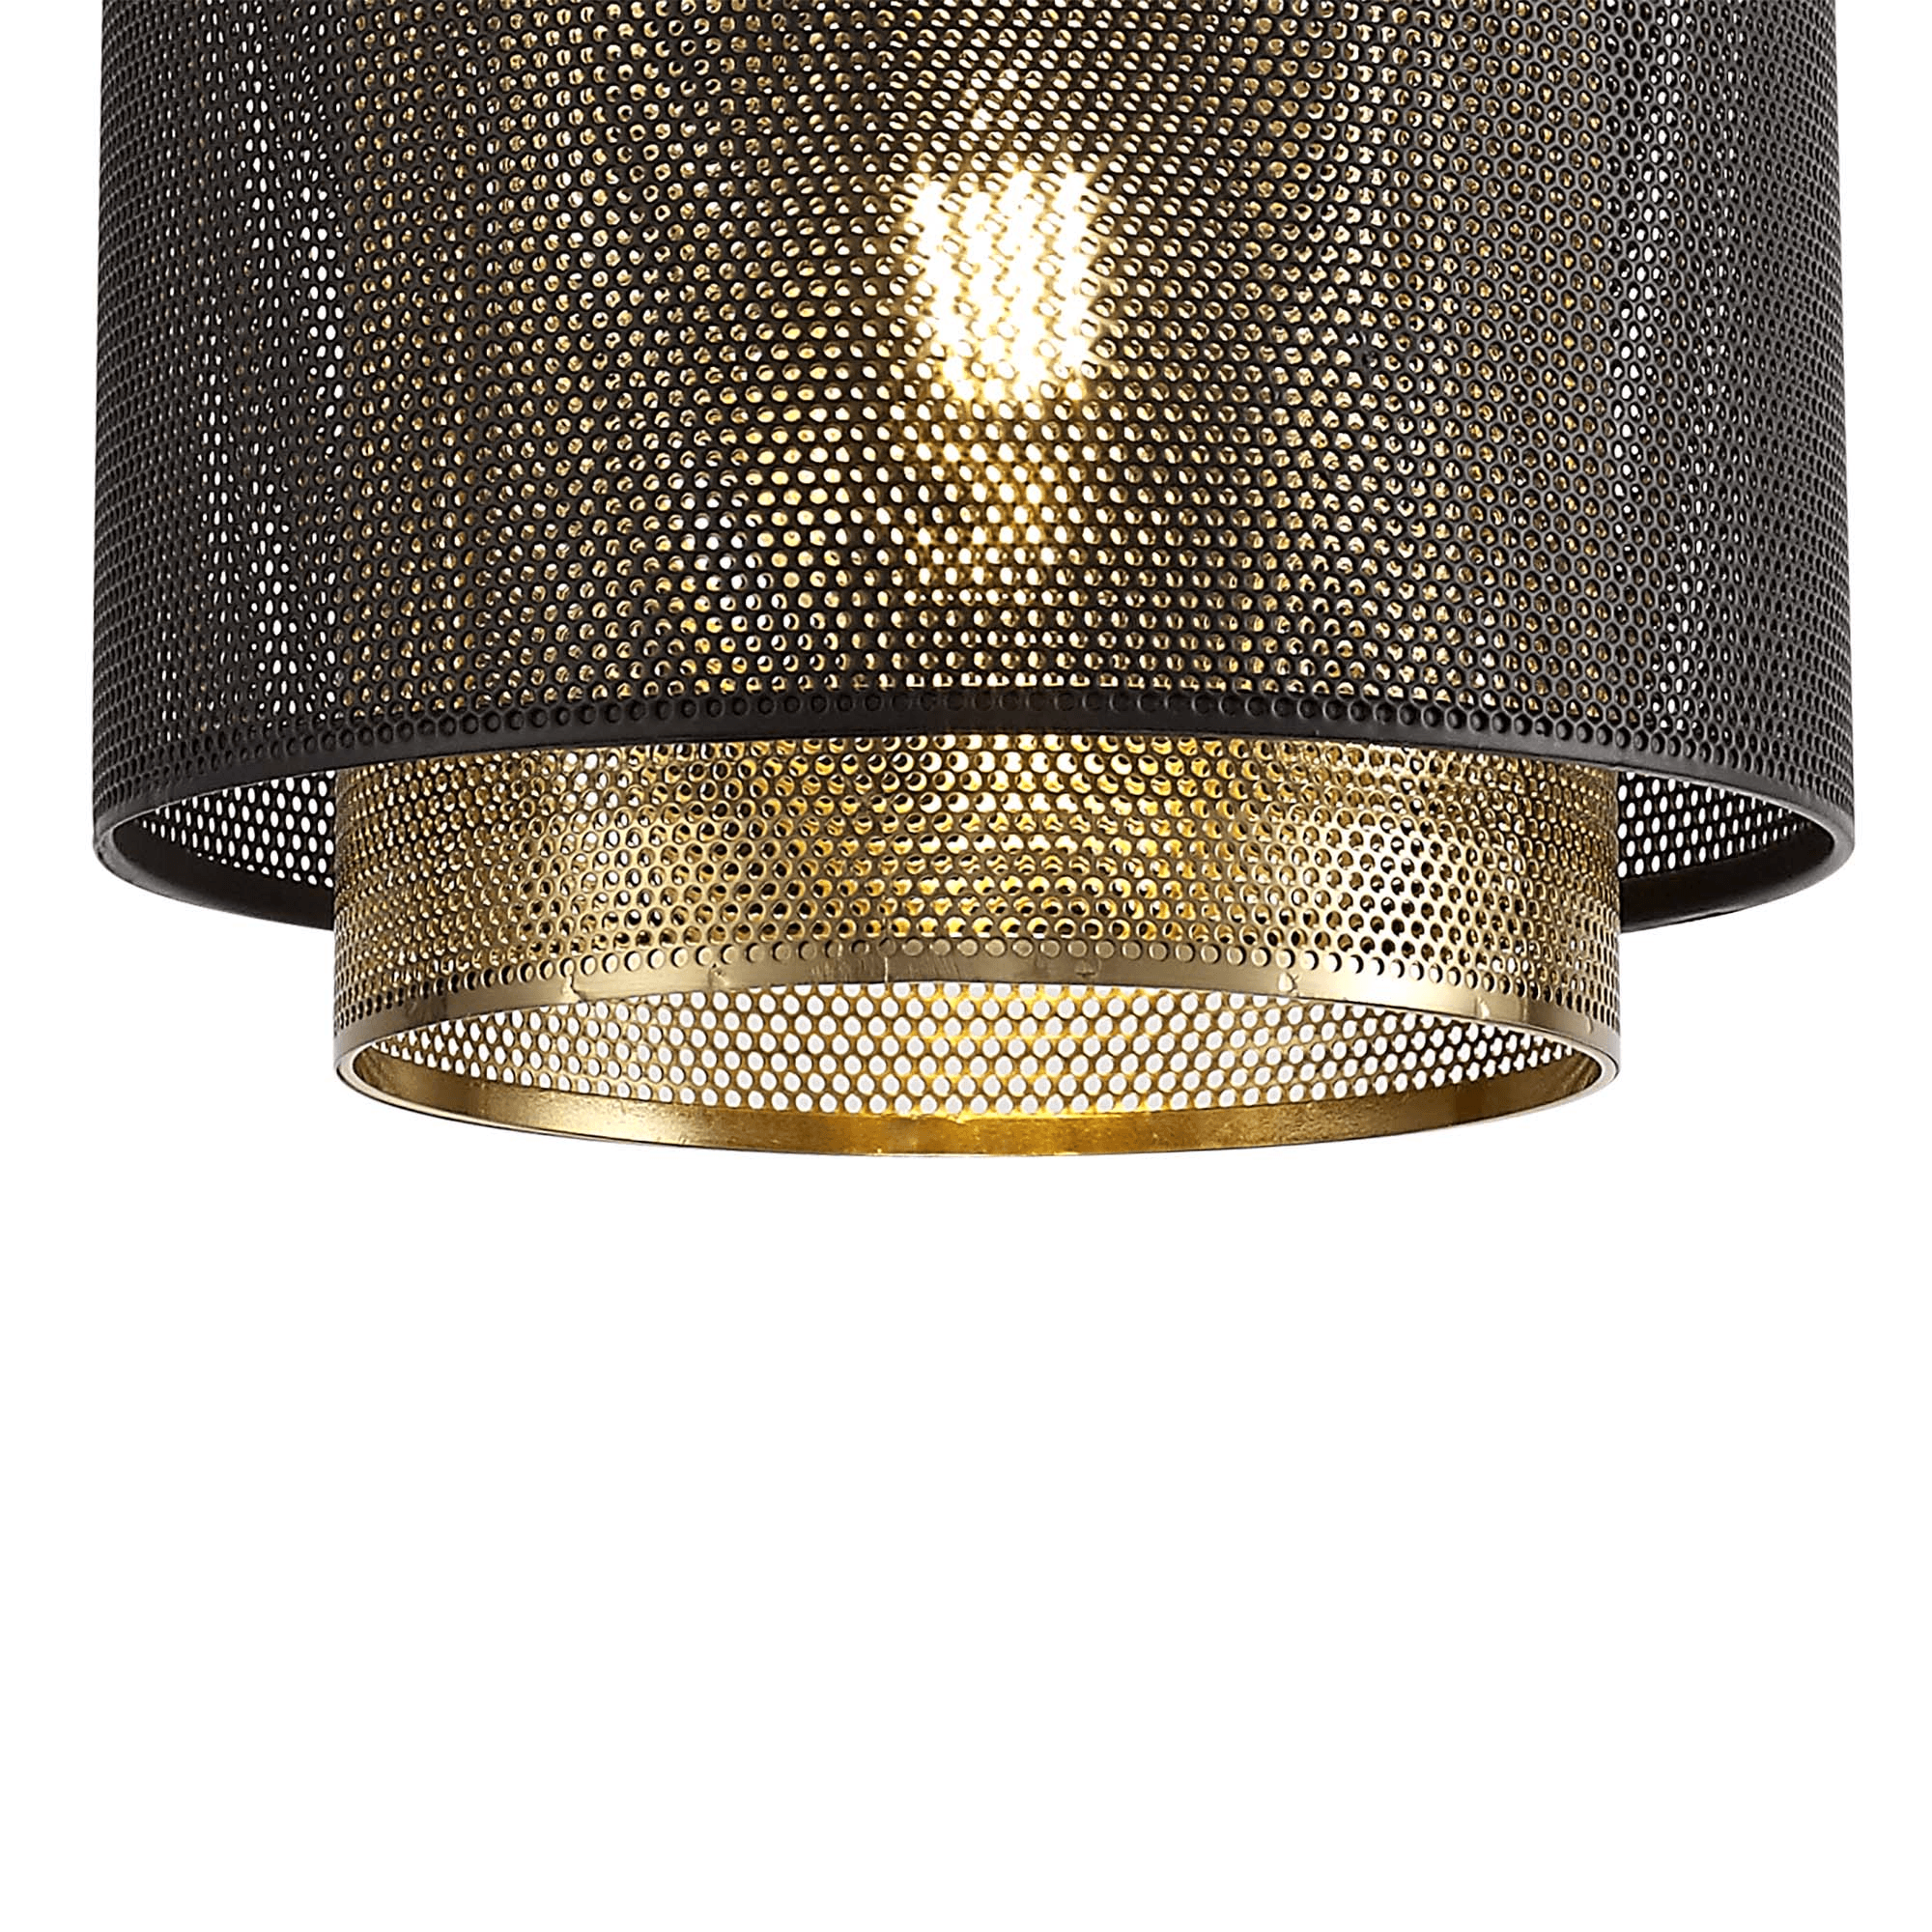 Lacey Single Small Pendant - Cusack Lighting